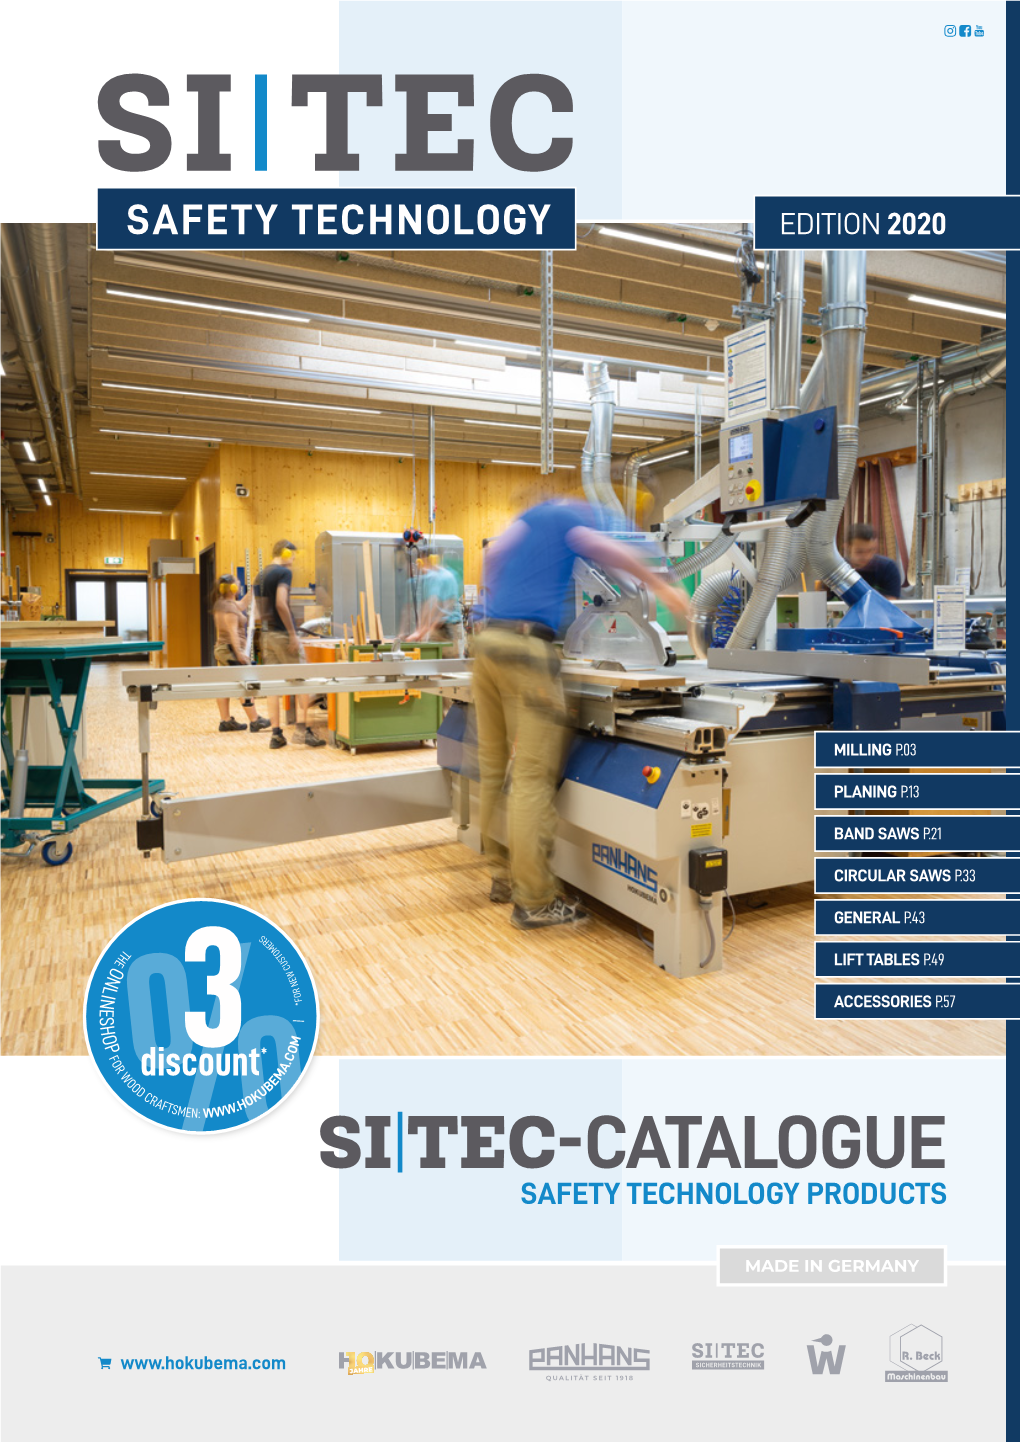 Si|Tec-Catalogue Safety Technology Products